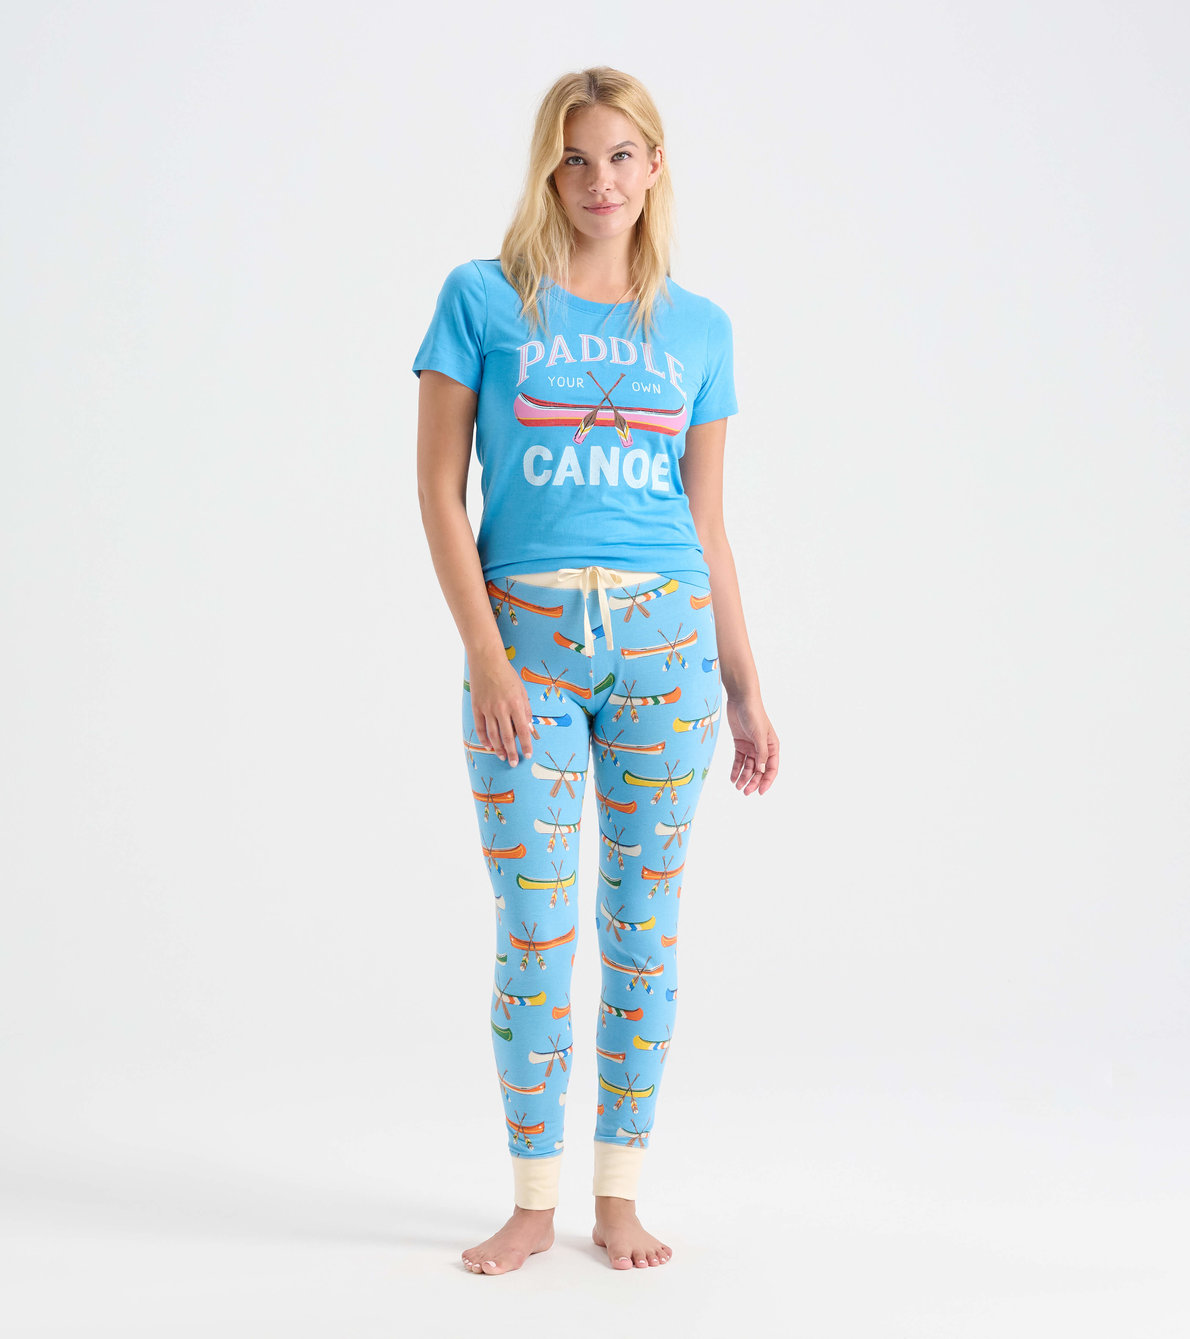 View larger image of Paddle Your Own Canoe Women's Pajama T-Shirt